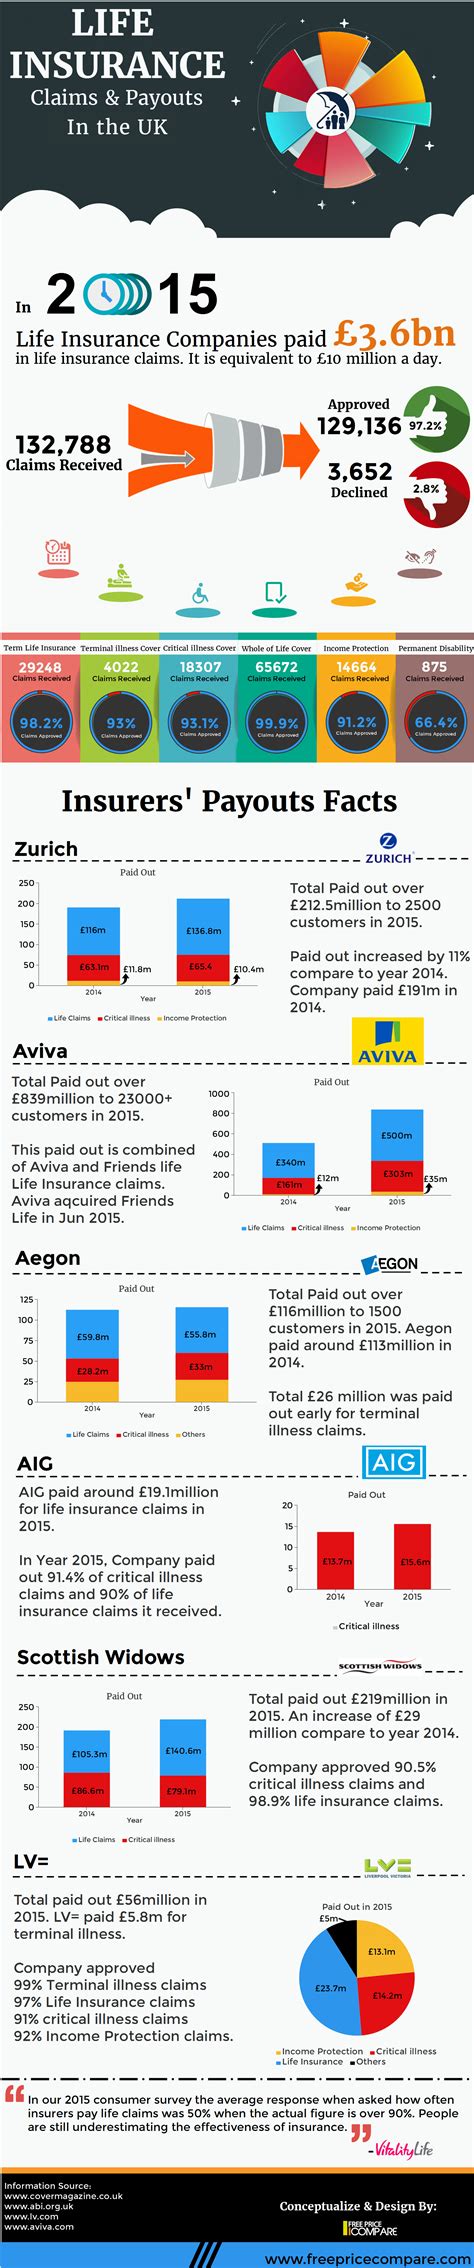 Life insurance claim forms & faqs. Life Insurance Claims & Payouts in the UK-Infographic-Free Price Compare